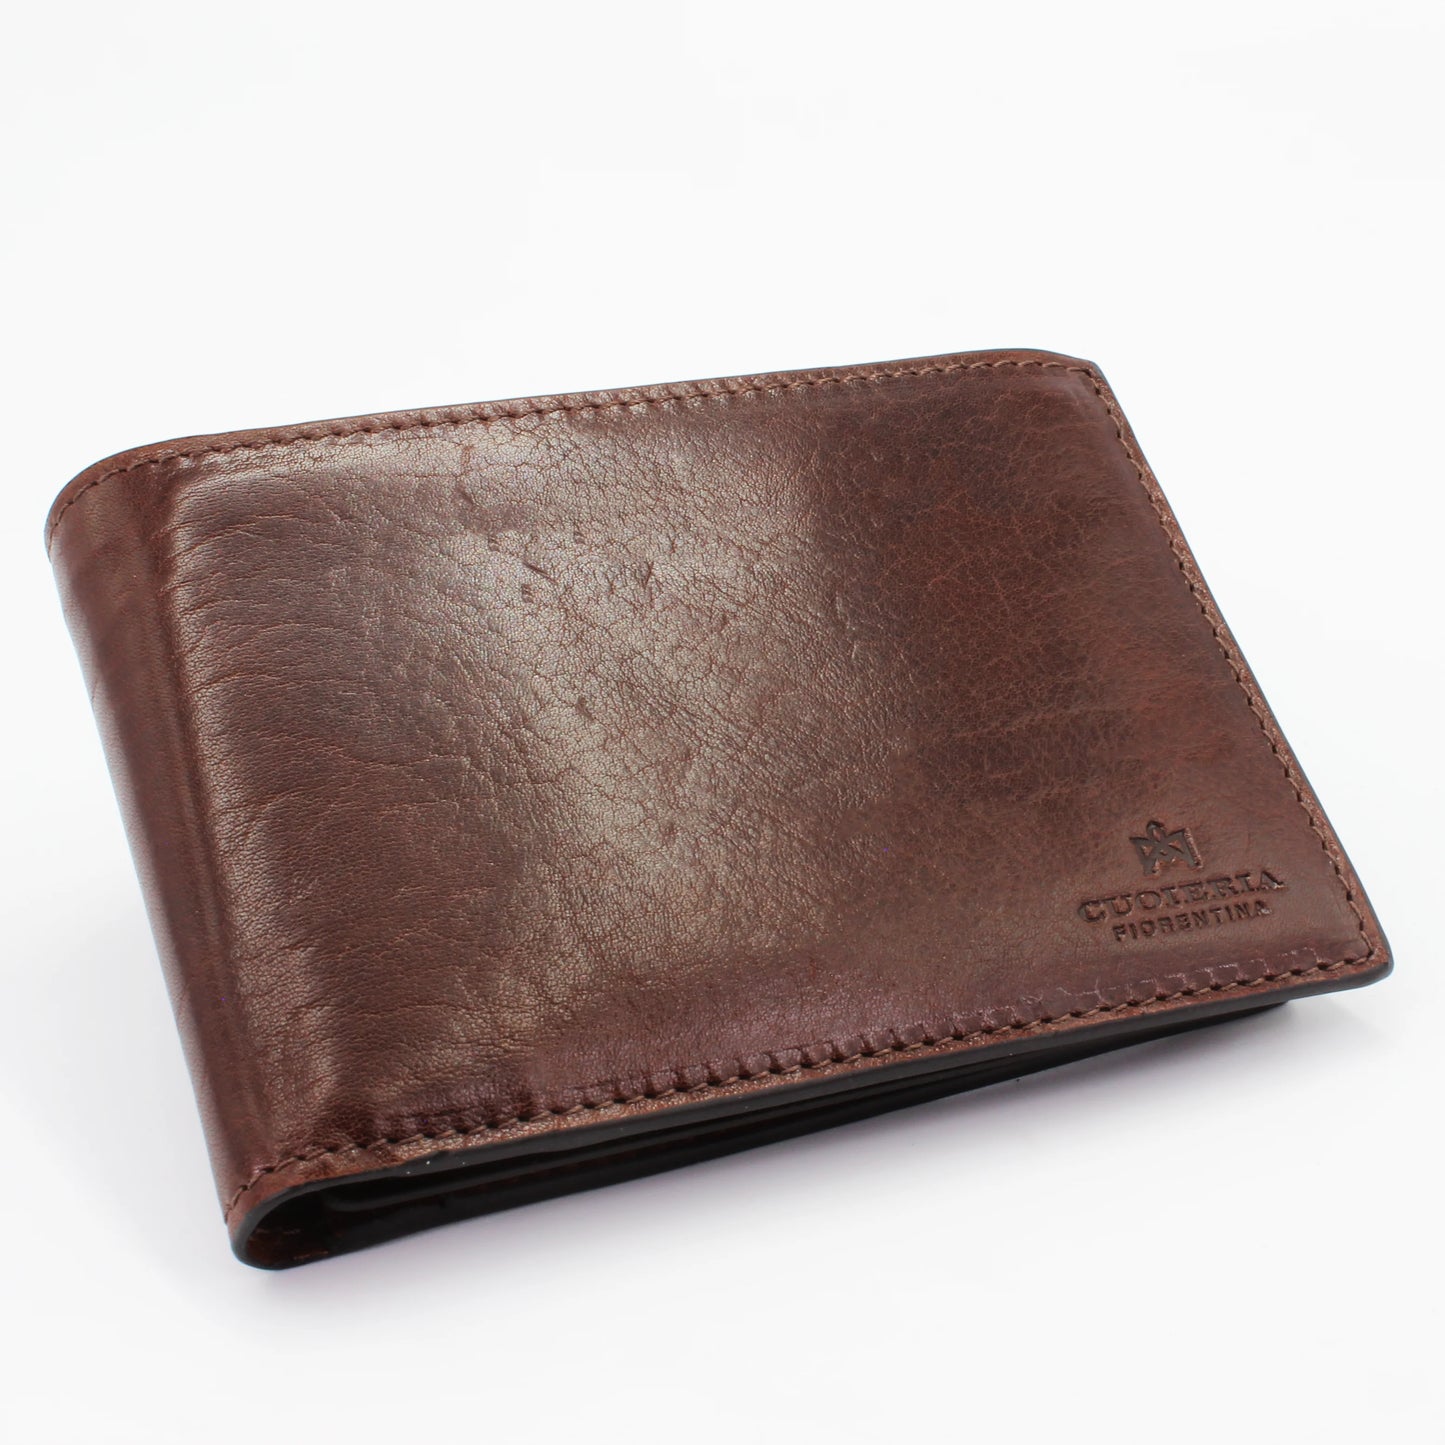 Shop our Italian-made Cuoieria Fiorentina Italian leather wallet in testa di moro (PU00000906735) or browse our range of Italian wallets and purses for men & women in-store at Aliverti Cape Town, or shop online.   We deliver in South Africa & offer multiple payment plans as well as accept multiple safe & secure payment methods.